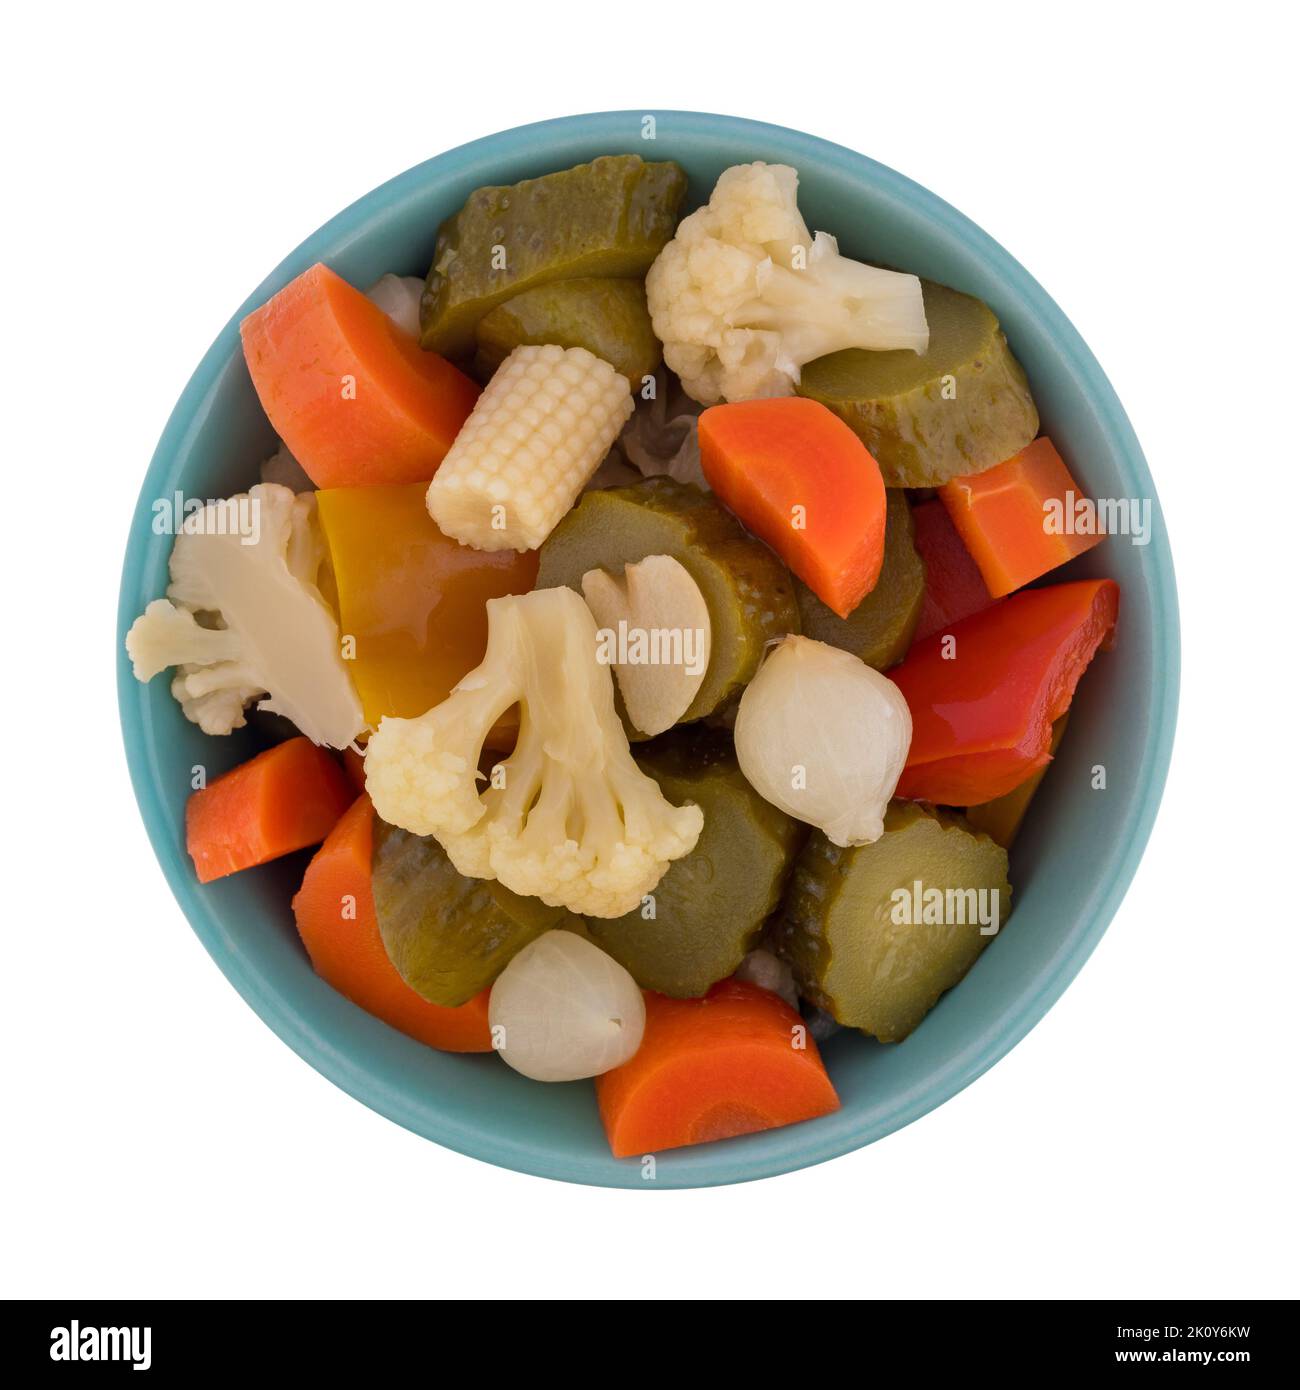 Top view of giardiniera pickled vegetables in a blue bowl isolated on a white background. Stock Photo